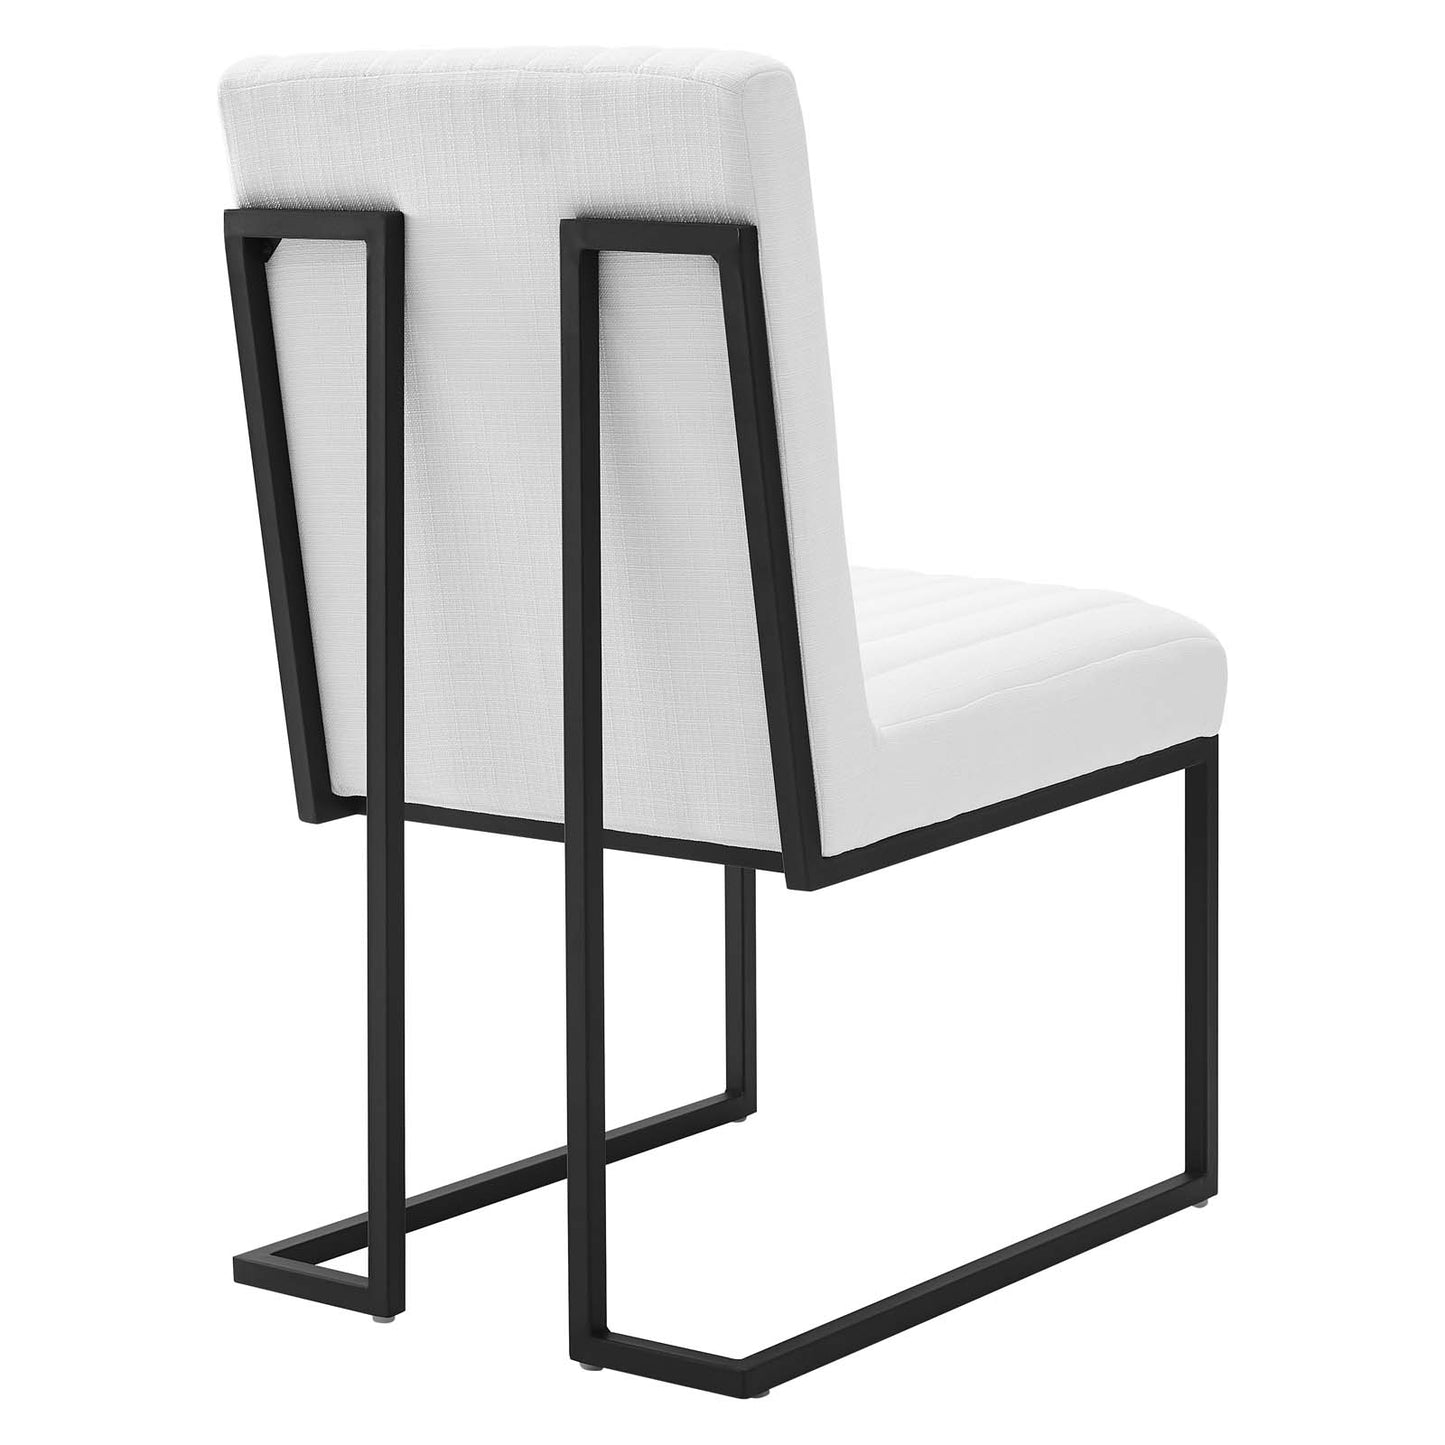 Indulge Channel Tufted Fabric Dining Chair